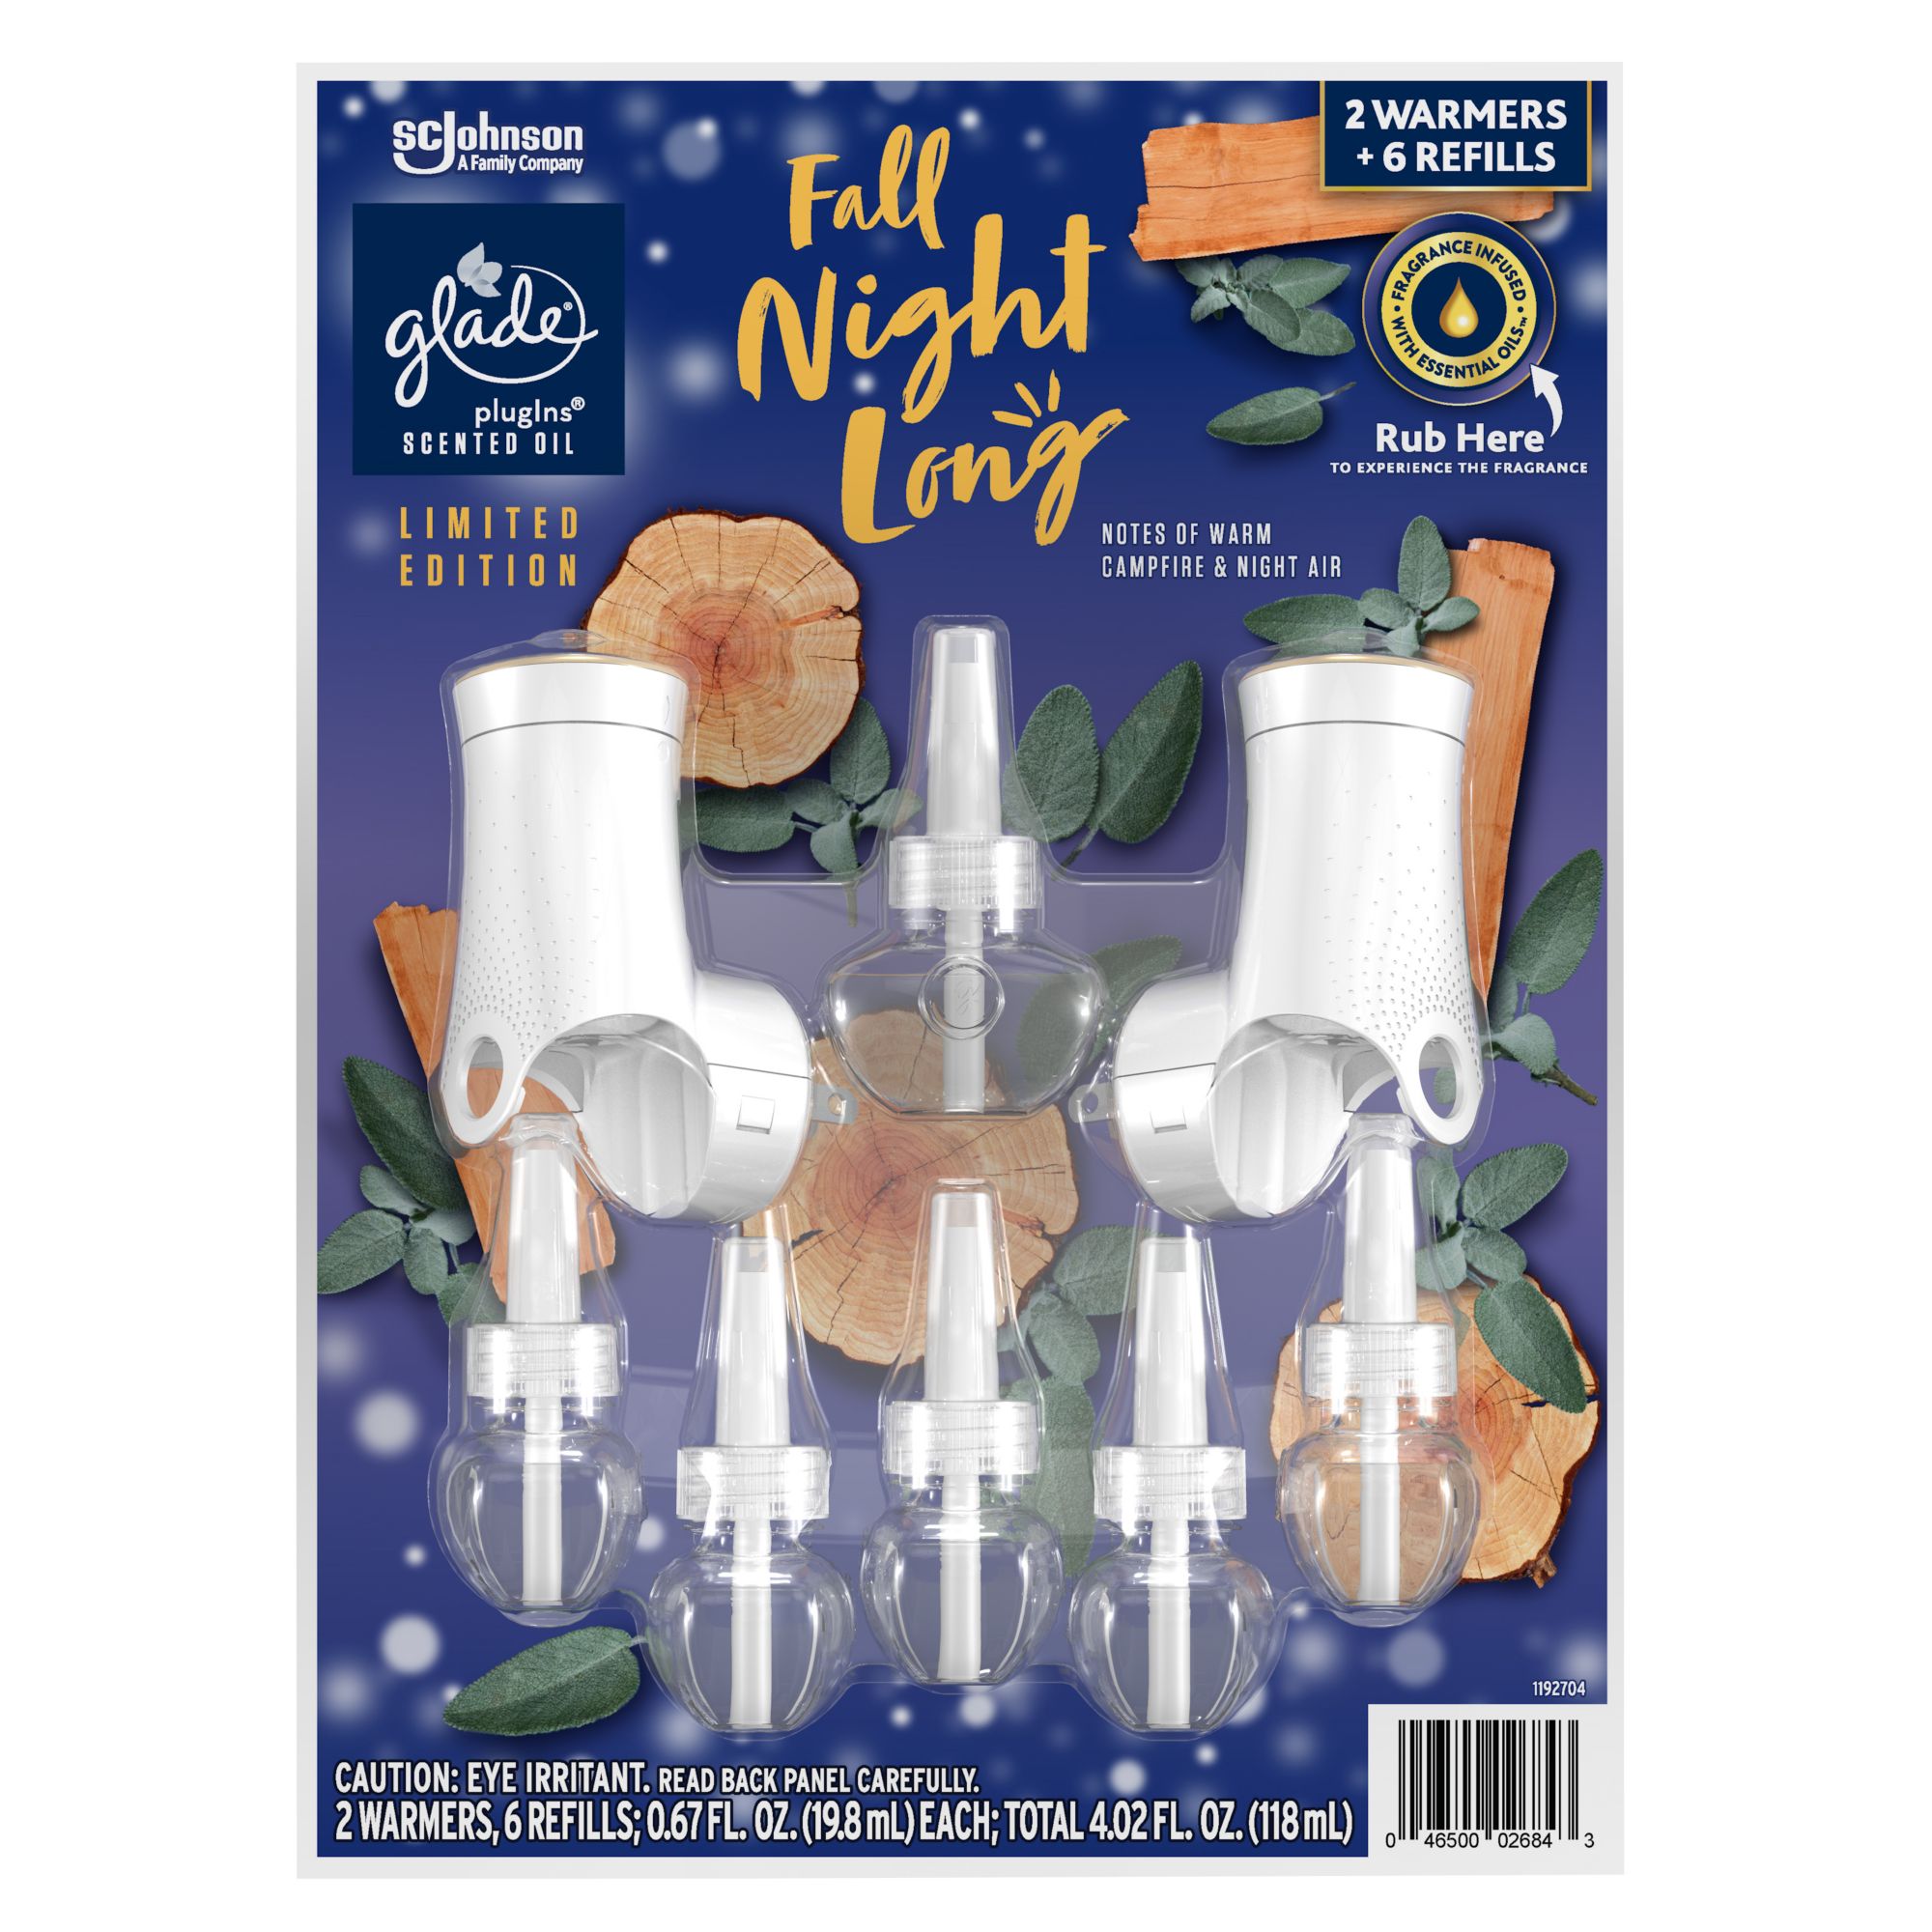 Glade Plugins Scented Oil Refill, Fall Night Long - 5 pack, 0.67 fl oz refills